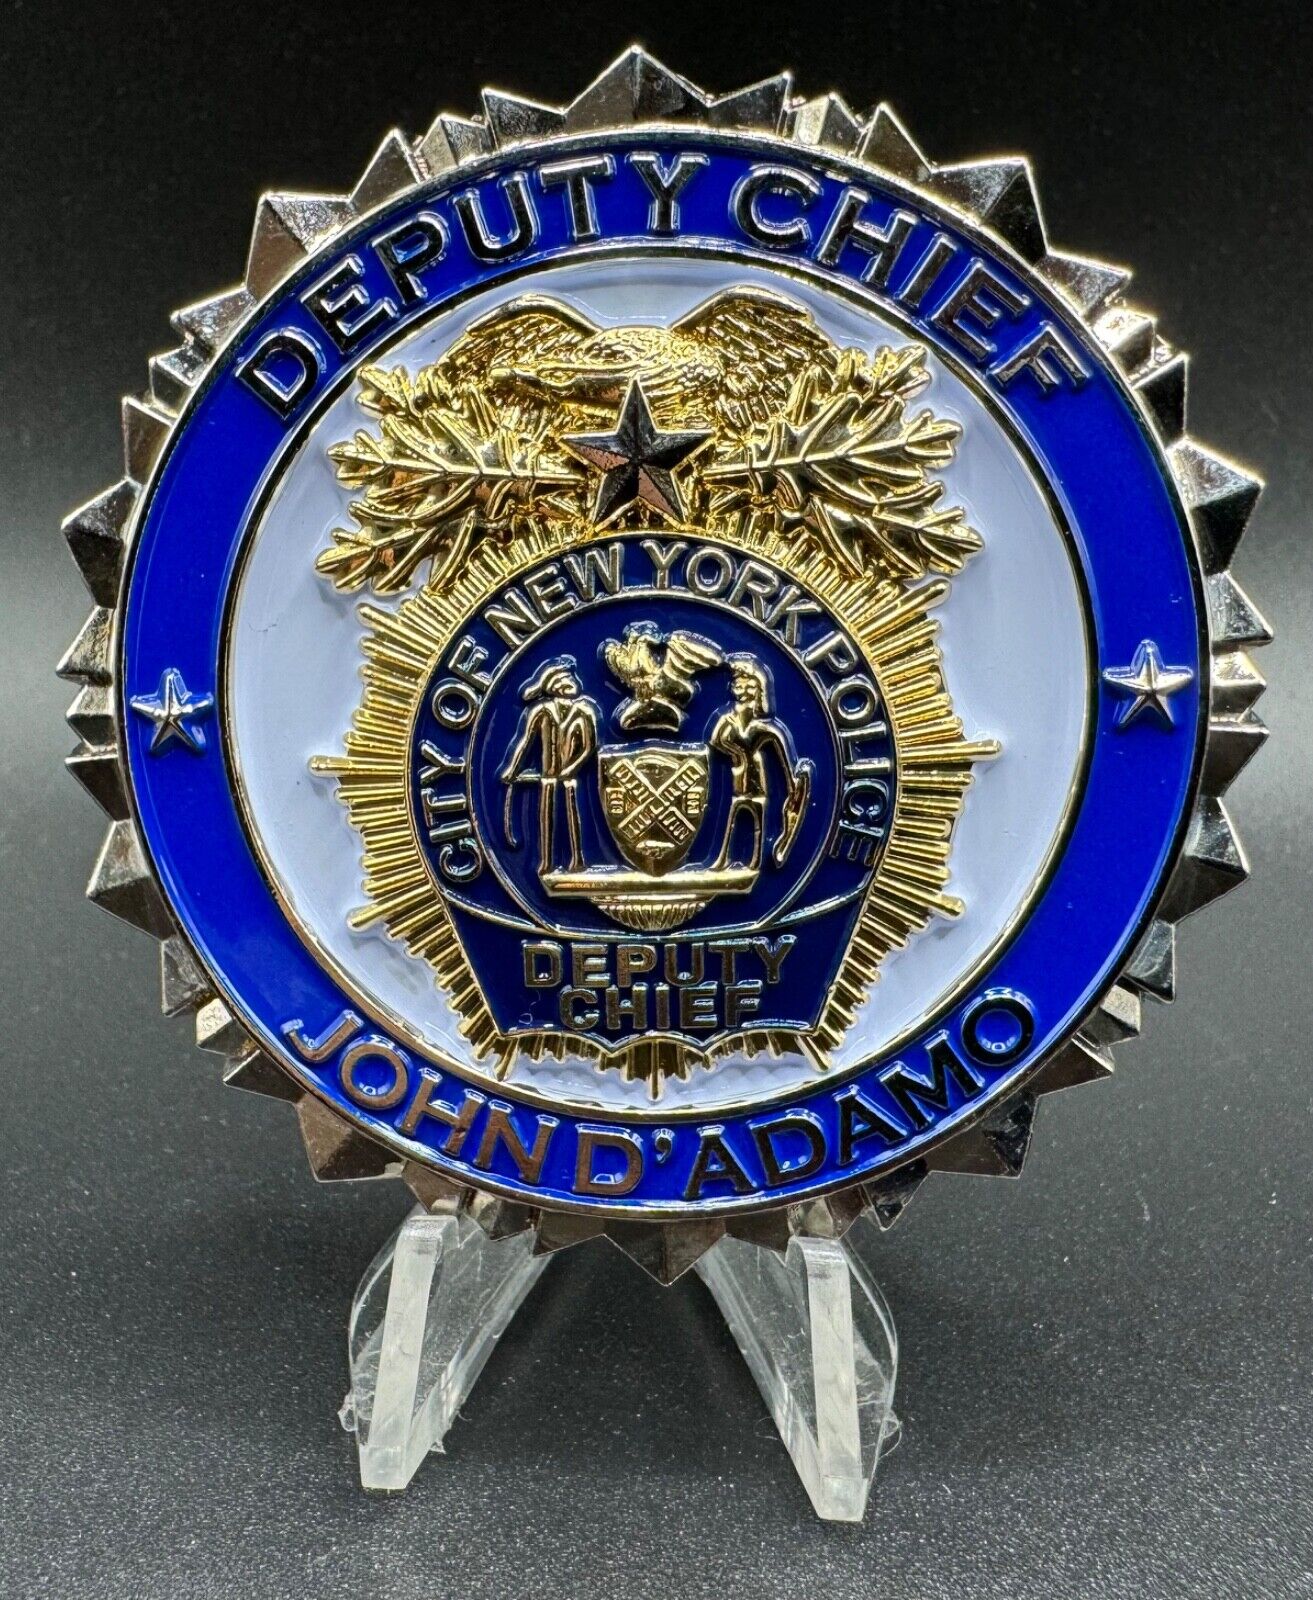 NYPD Deputy Chief J. D'adamo Strategic Response Group Police Off. Challenge Coin